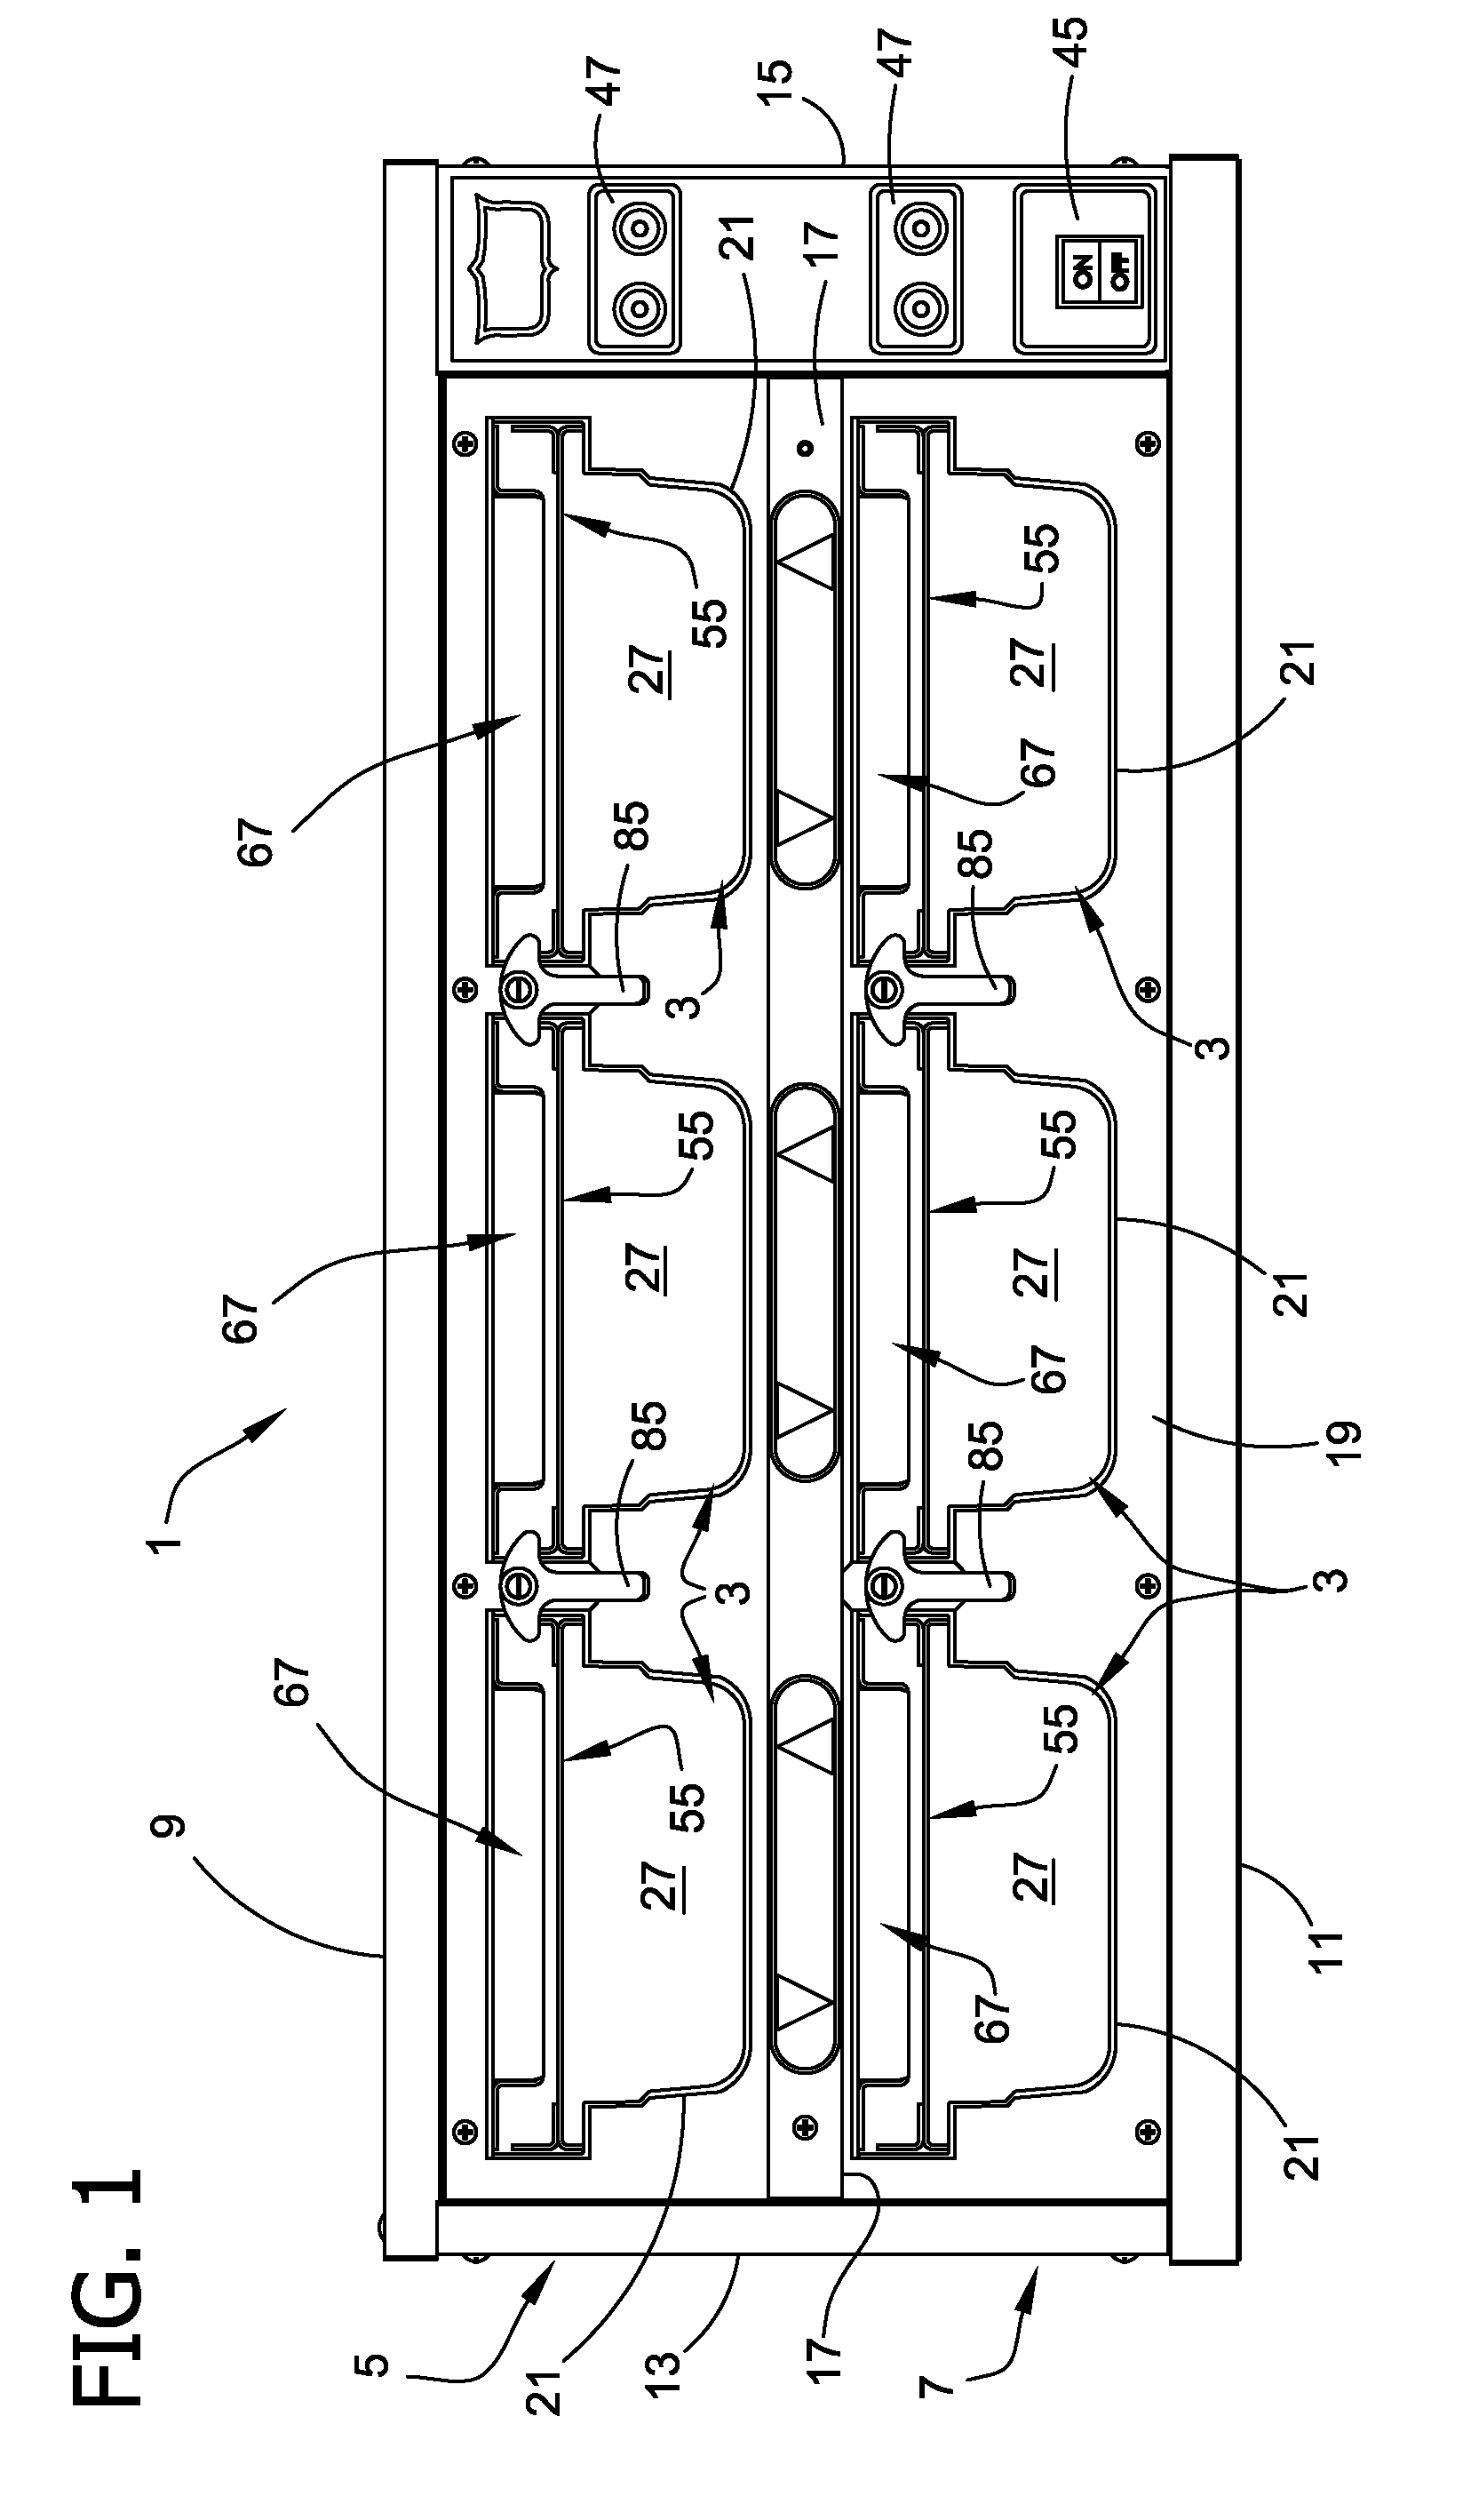 Food service apparatus and methods